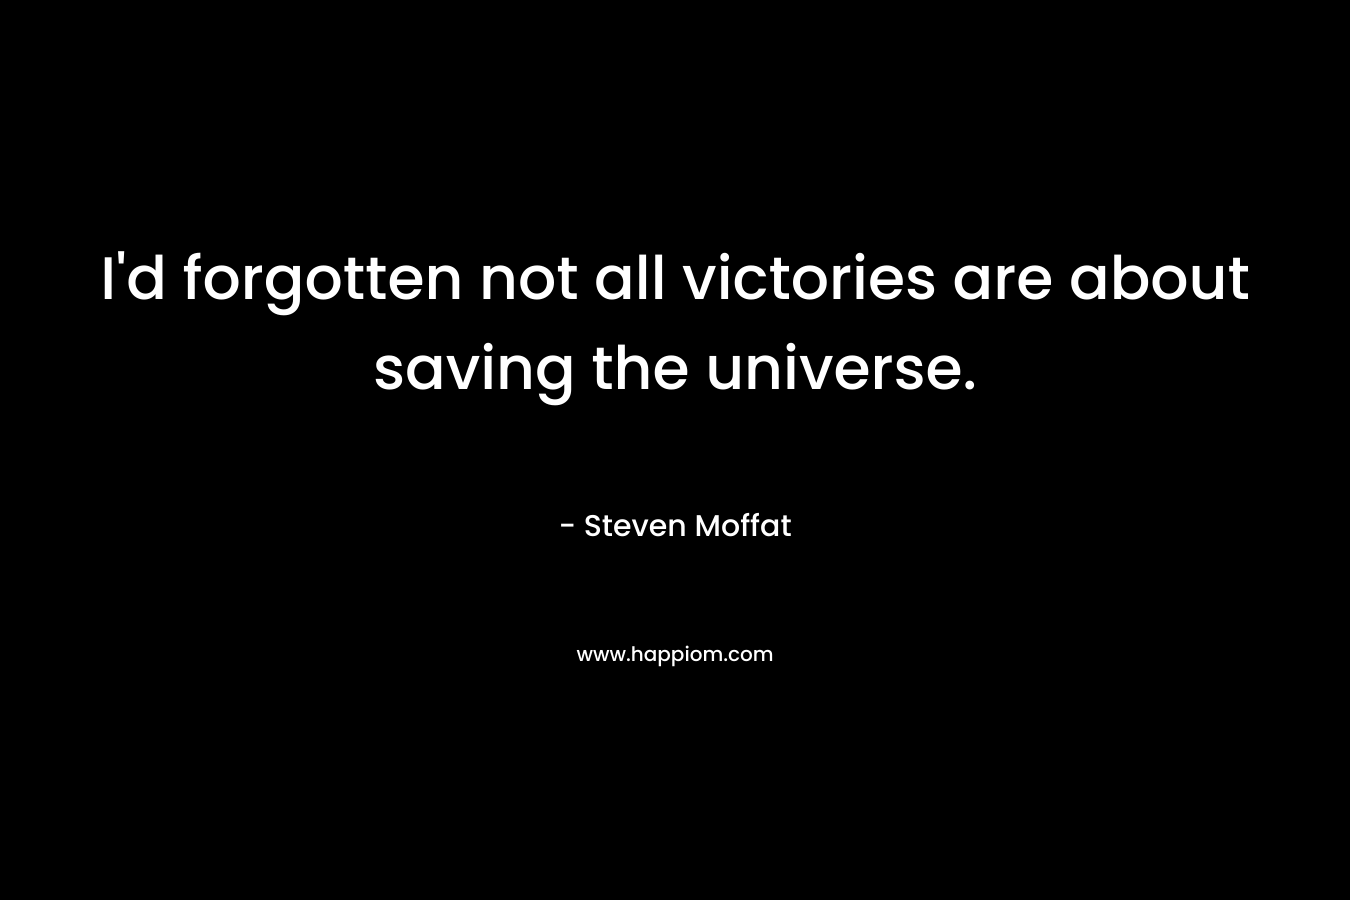 I’d forgotten not all victories are about saving the universe. – Steven Moffat